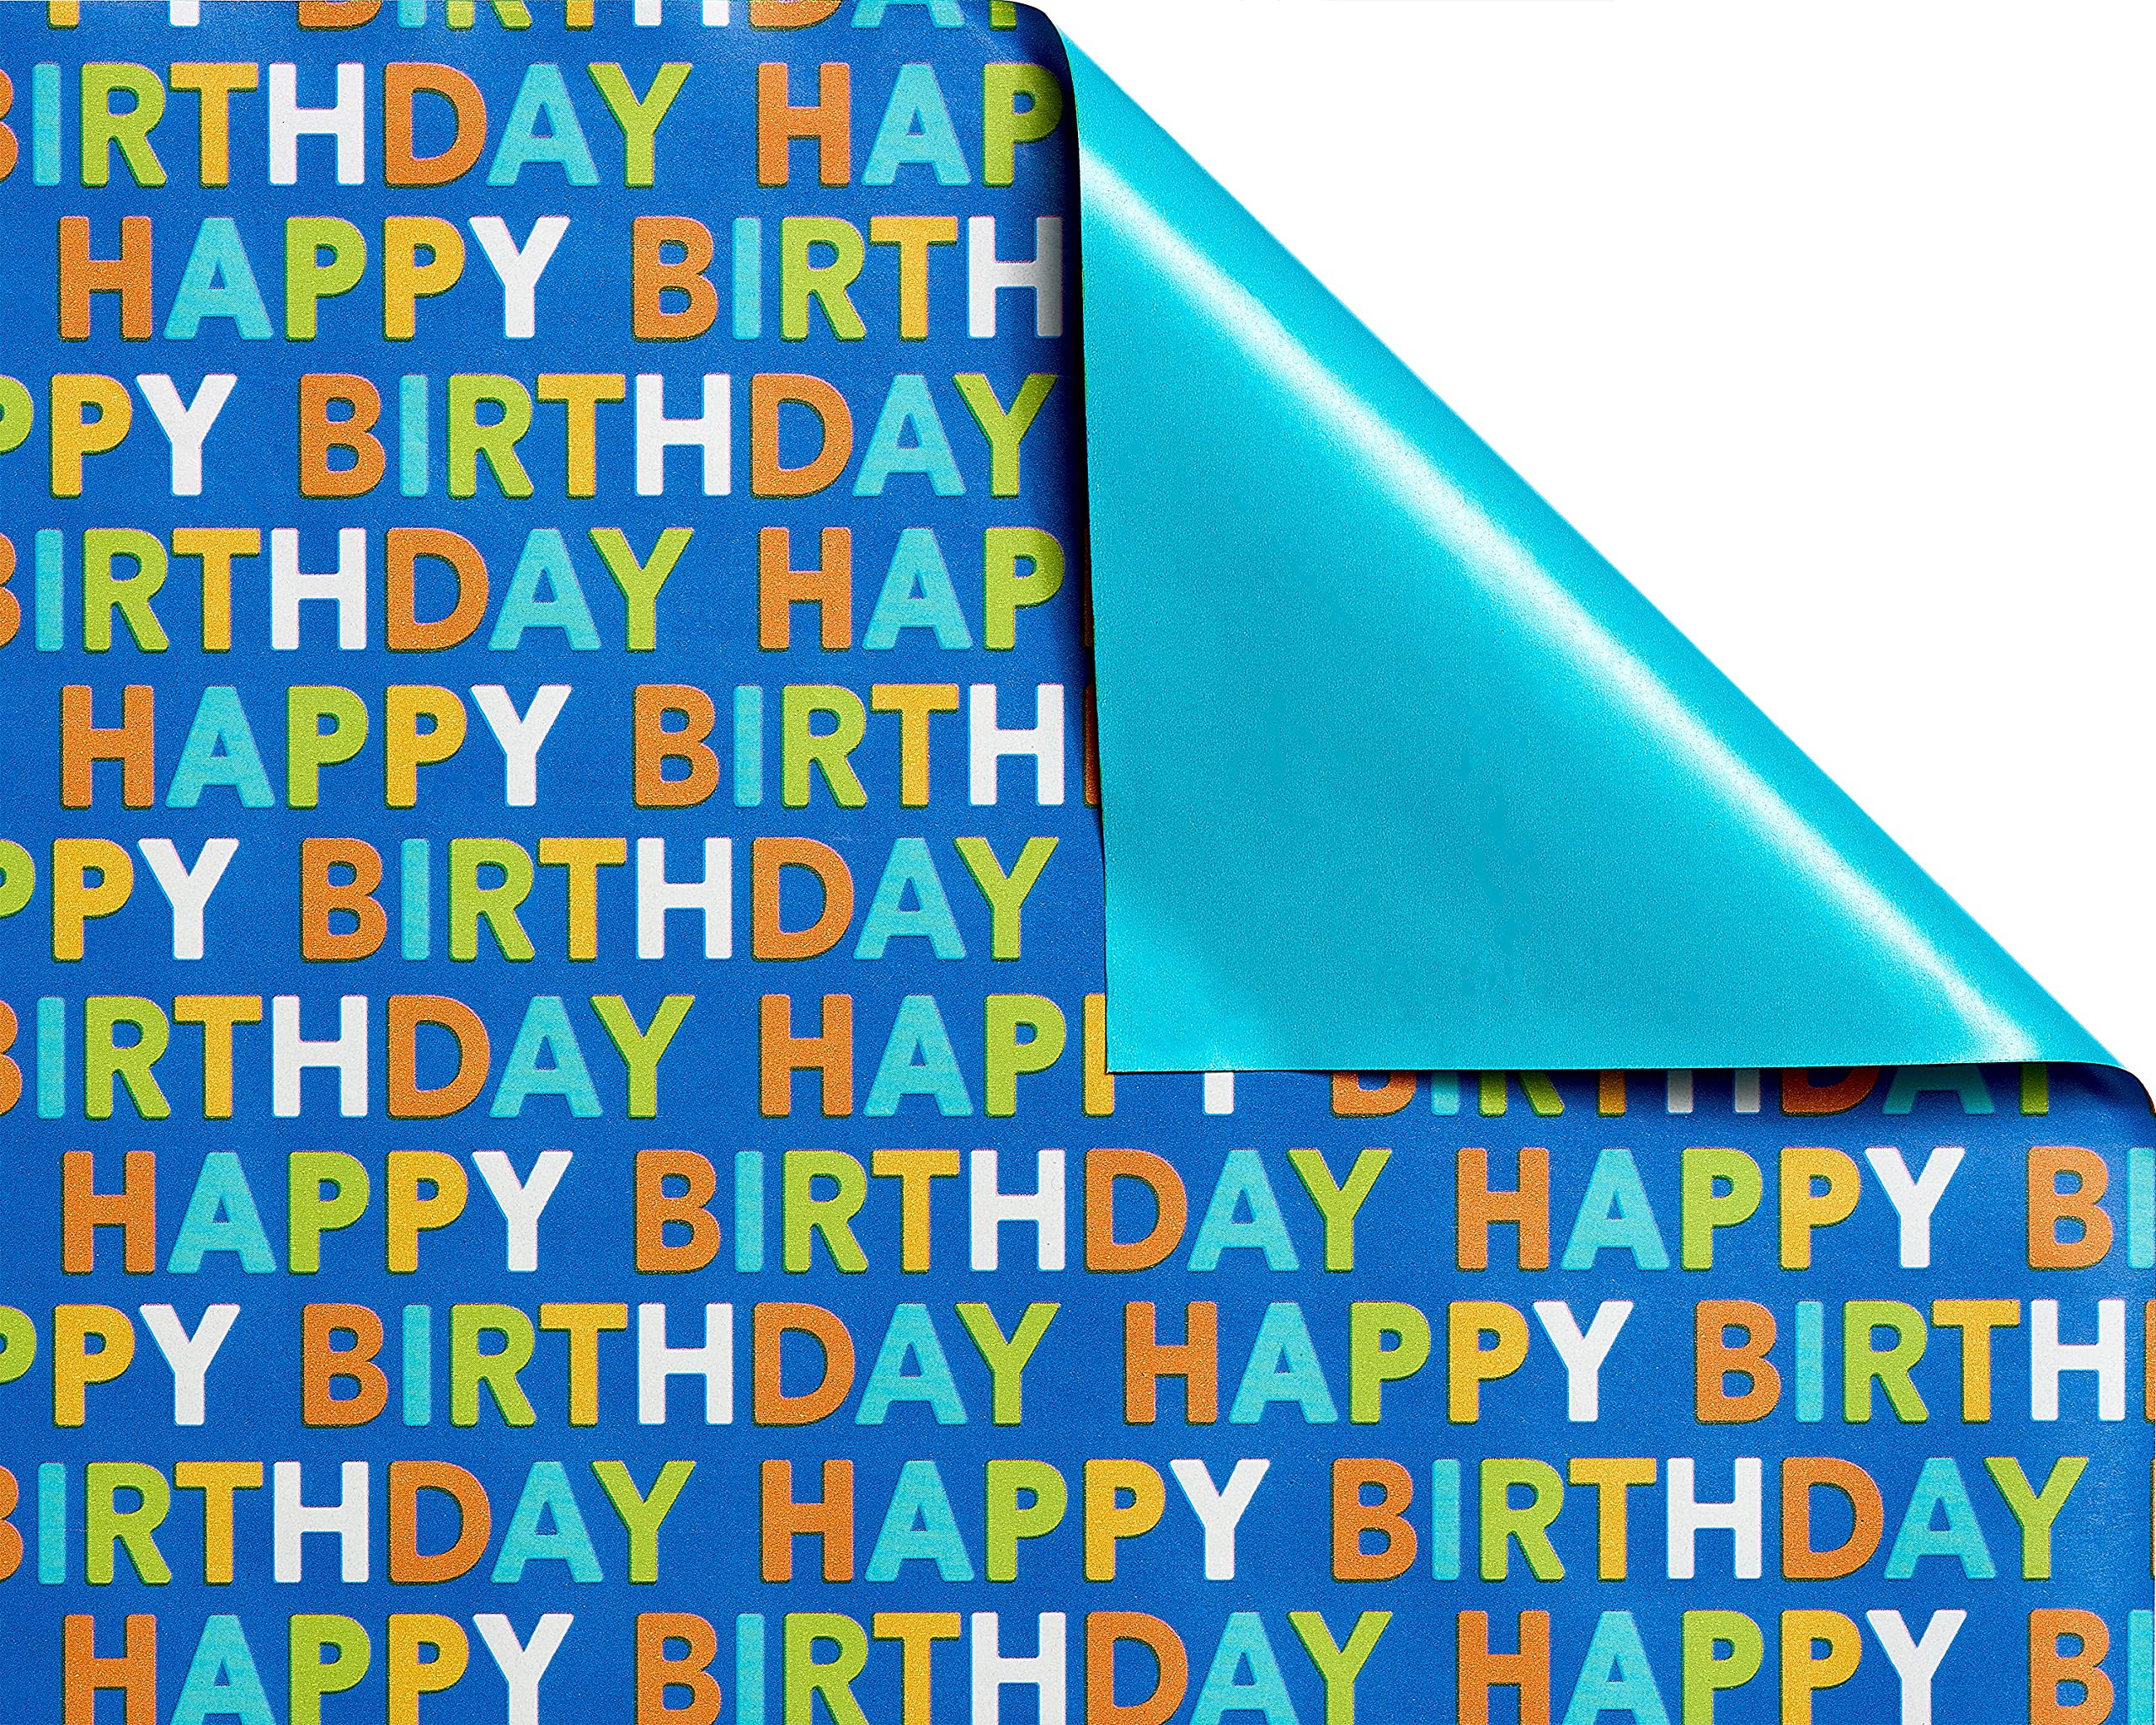 American Greetings Reversible Happy Birthday and All-Occasion Wrapping Paper, Bright Colors (4 Rolls, 160 sq. ft.)